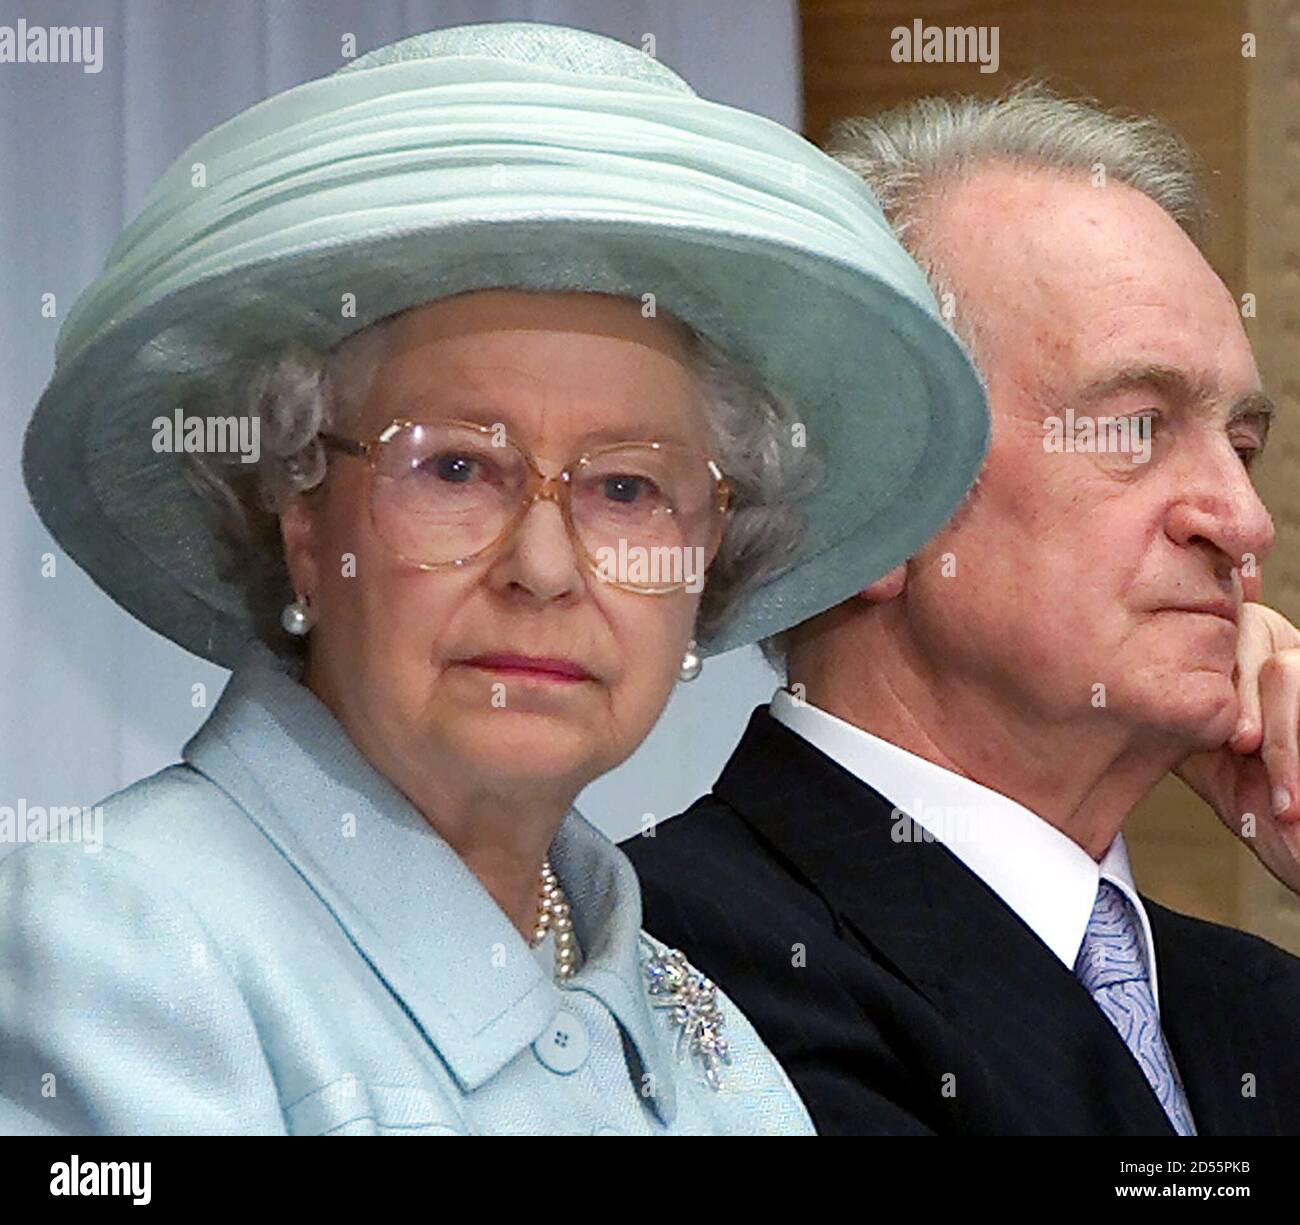 British Queen Elizabeth (L) is accompanied by German President Johannes Rau (C) as she attends the opening ceremony of the new British embassy in Berlin July 18. The new embassy, designed by British architect Michael Wilford, is based on the same site as the old building which was destroyed by Allied bombers in World War Two.  MUR Stock Photo